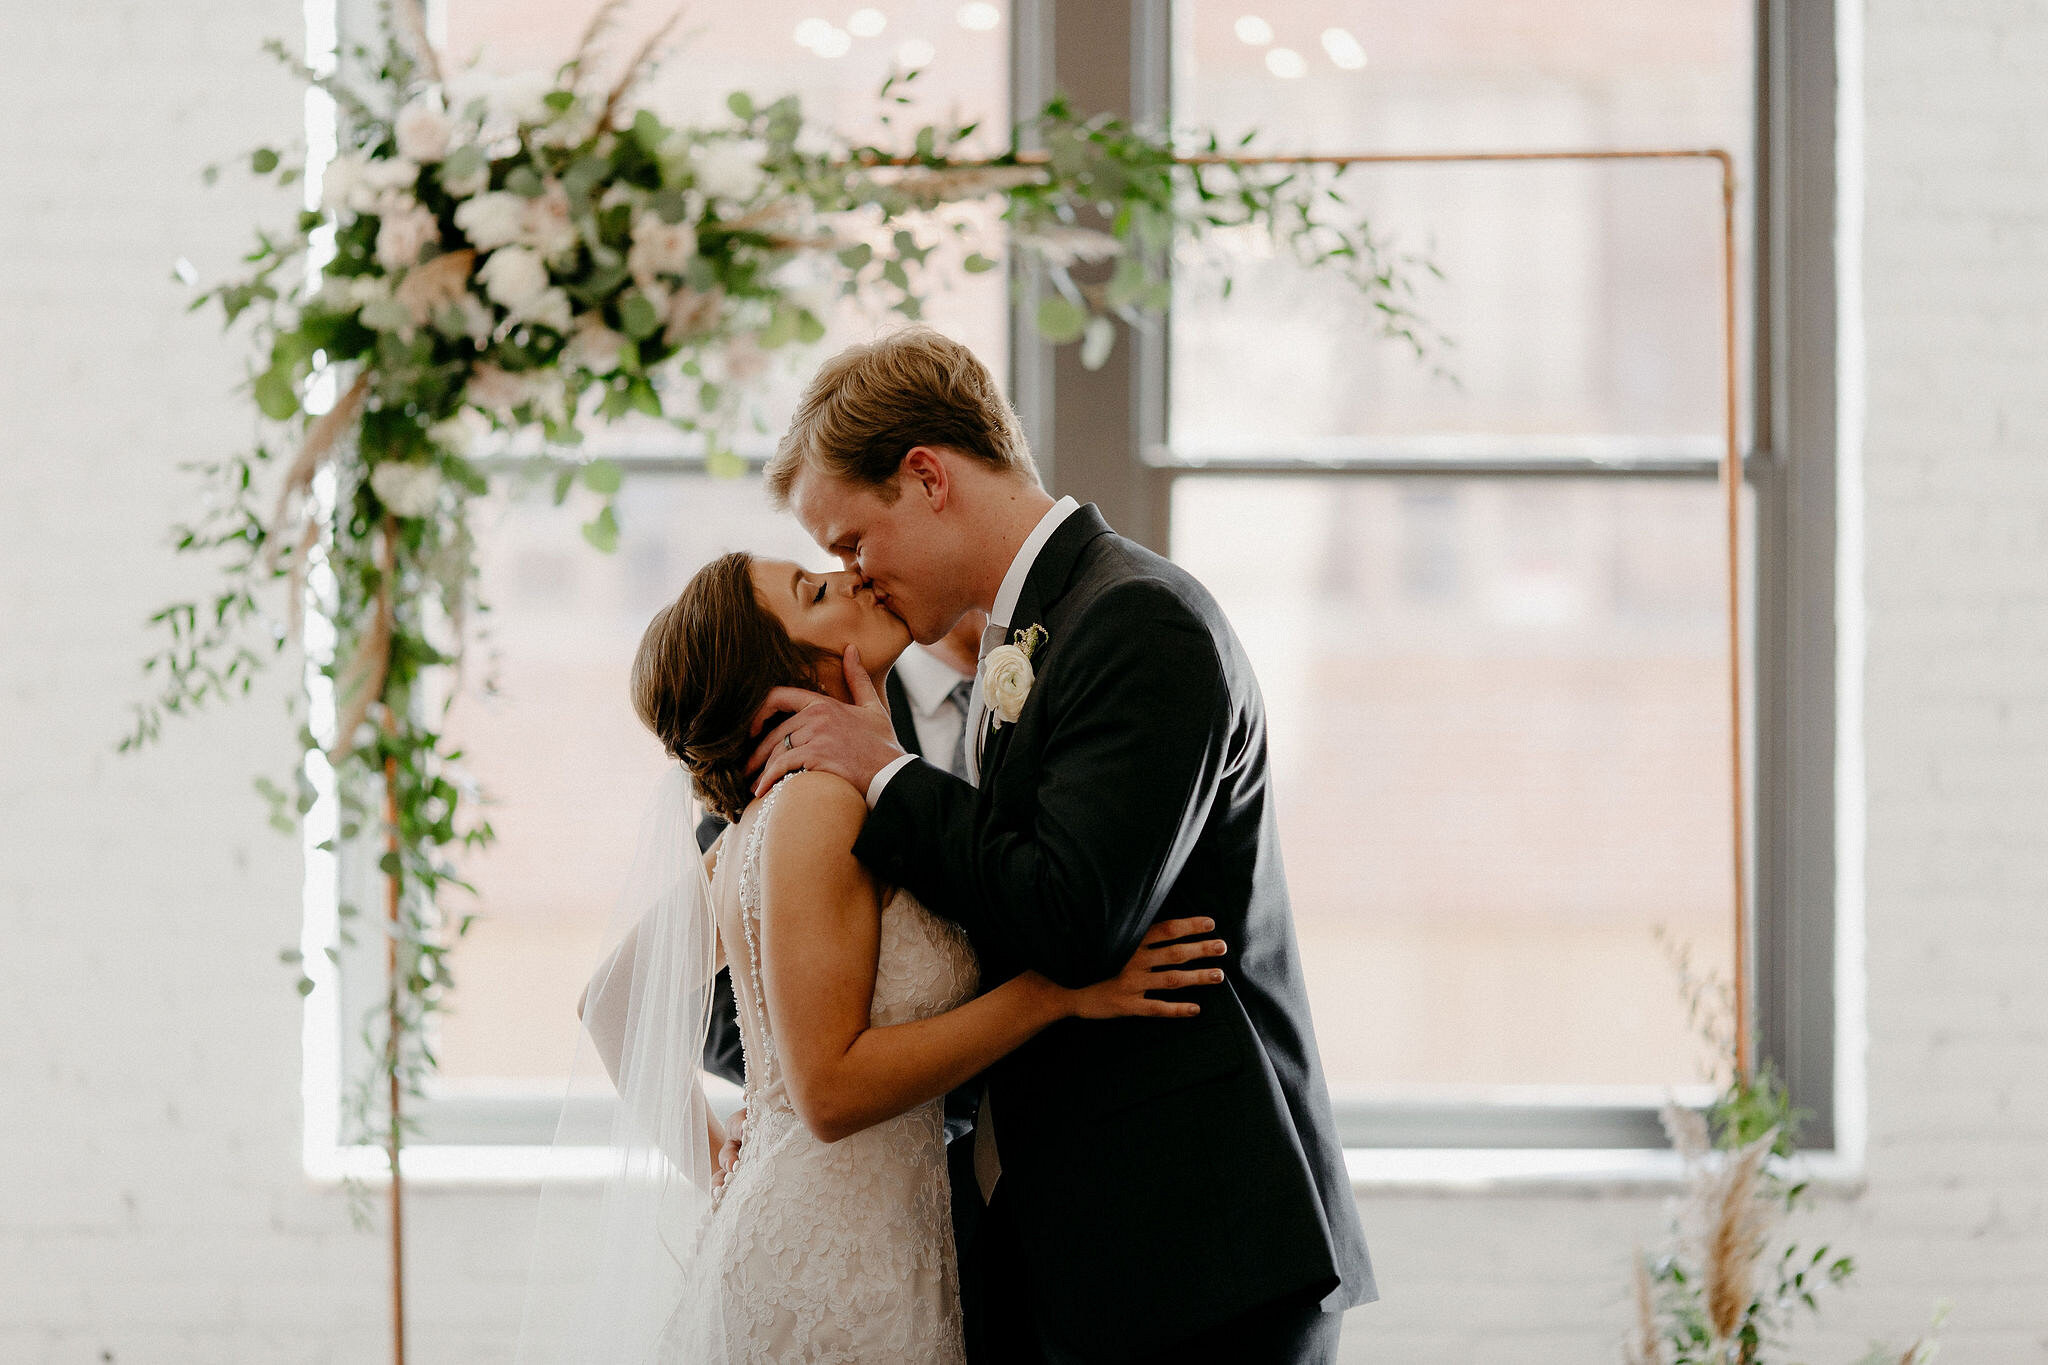 Sweet Sunday Nuptials at Company 251 captured by Justine Montigny featured on CHI thee WED